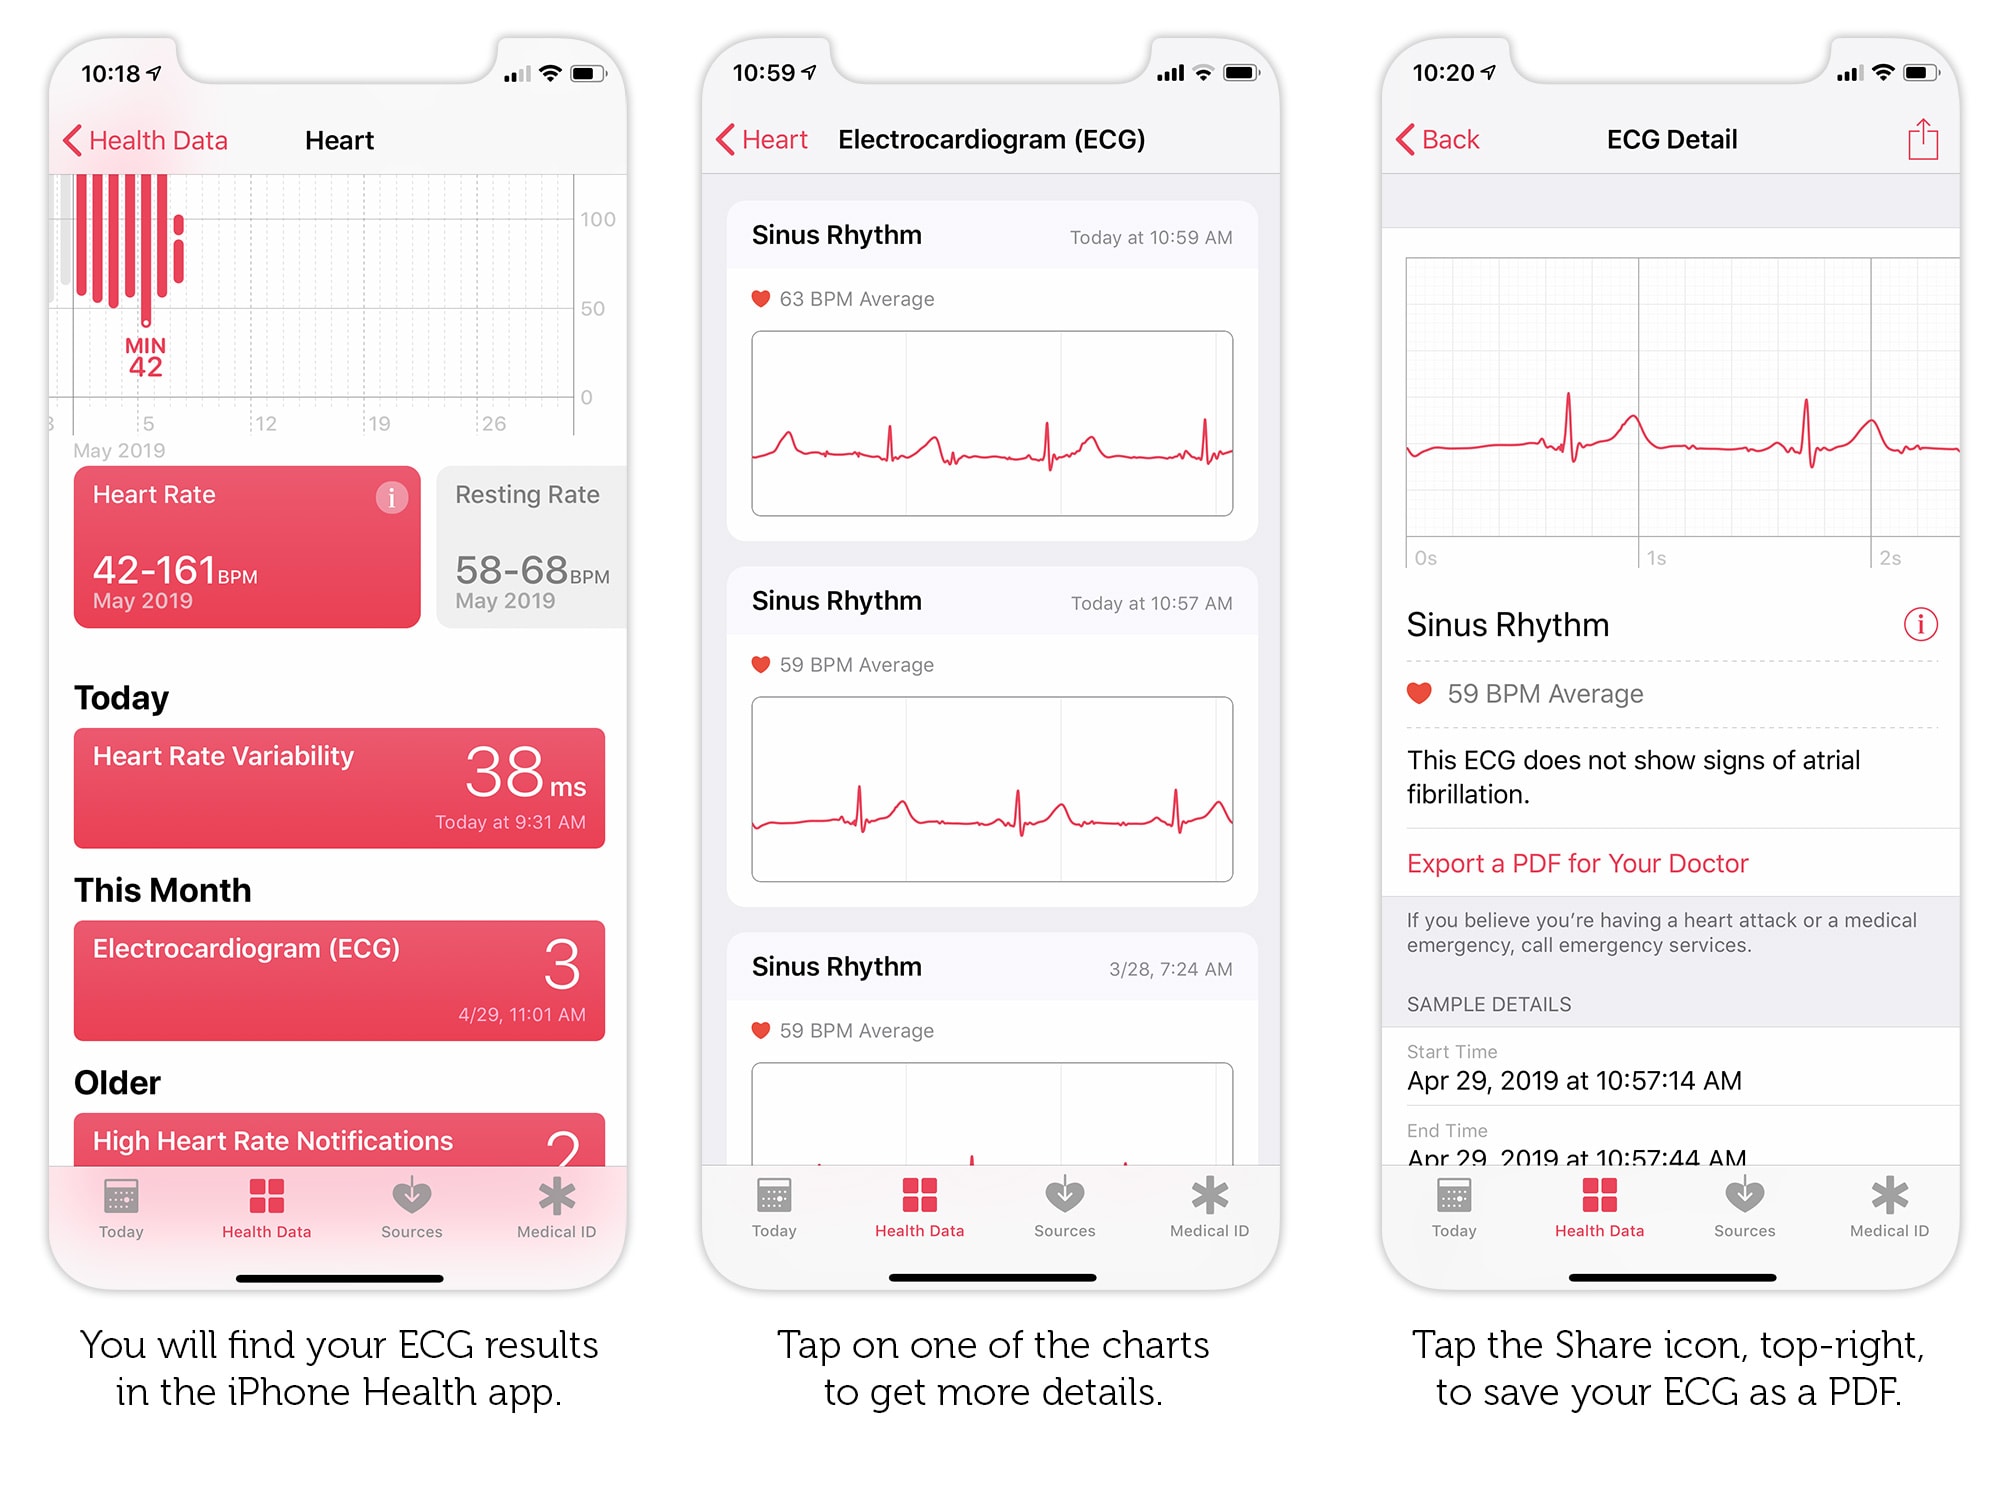 How to export your Apple Watch ECG result as a PDF to show your doctor